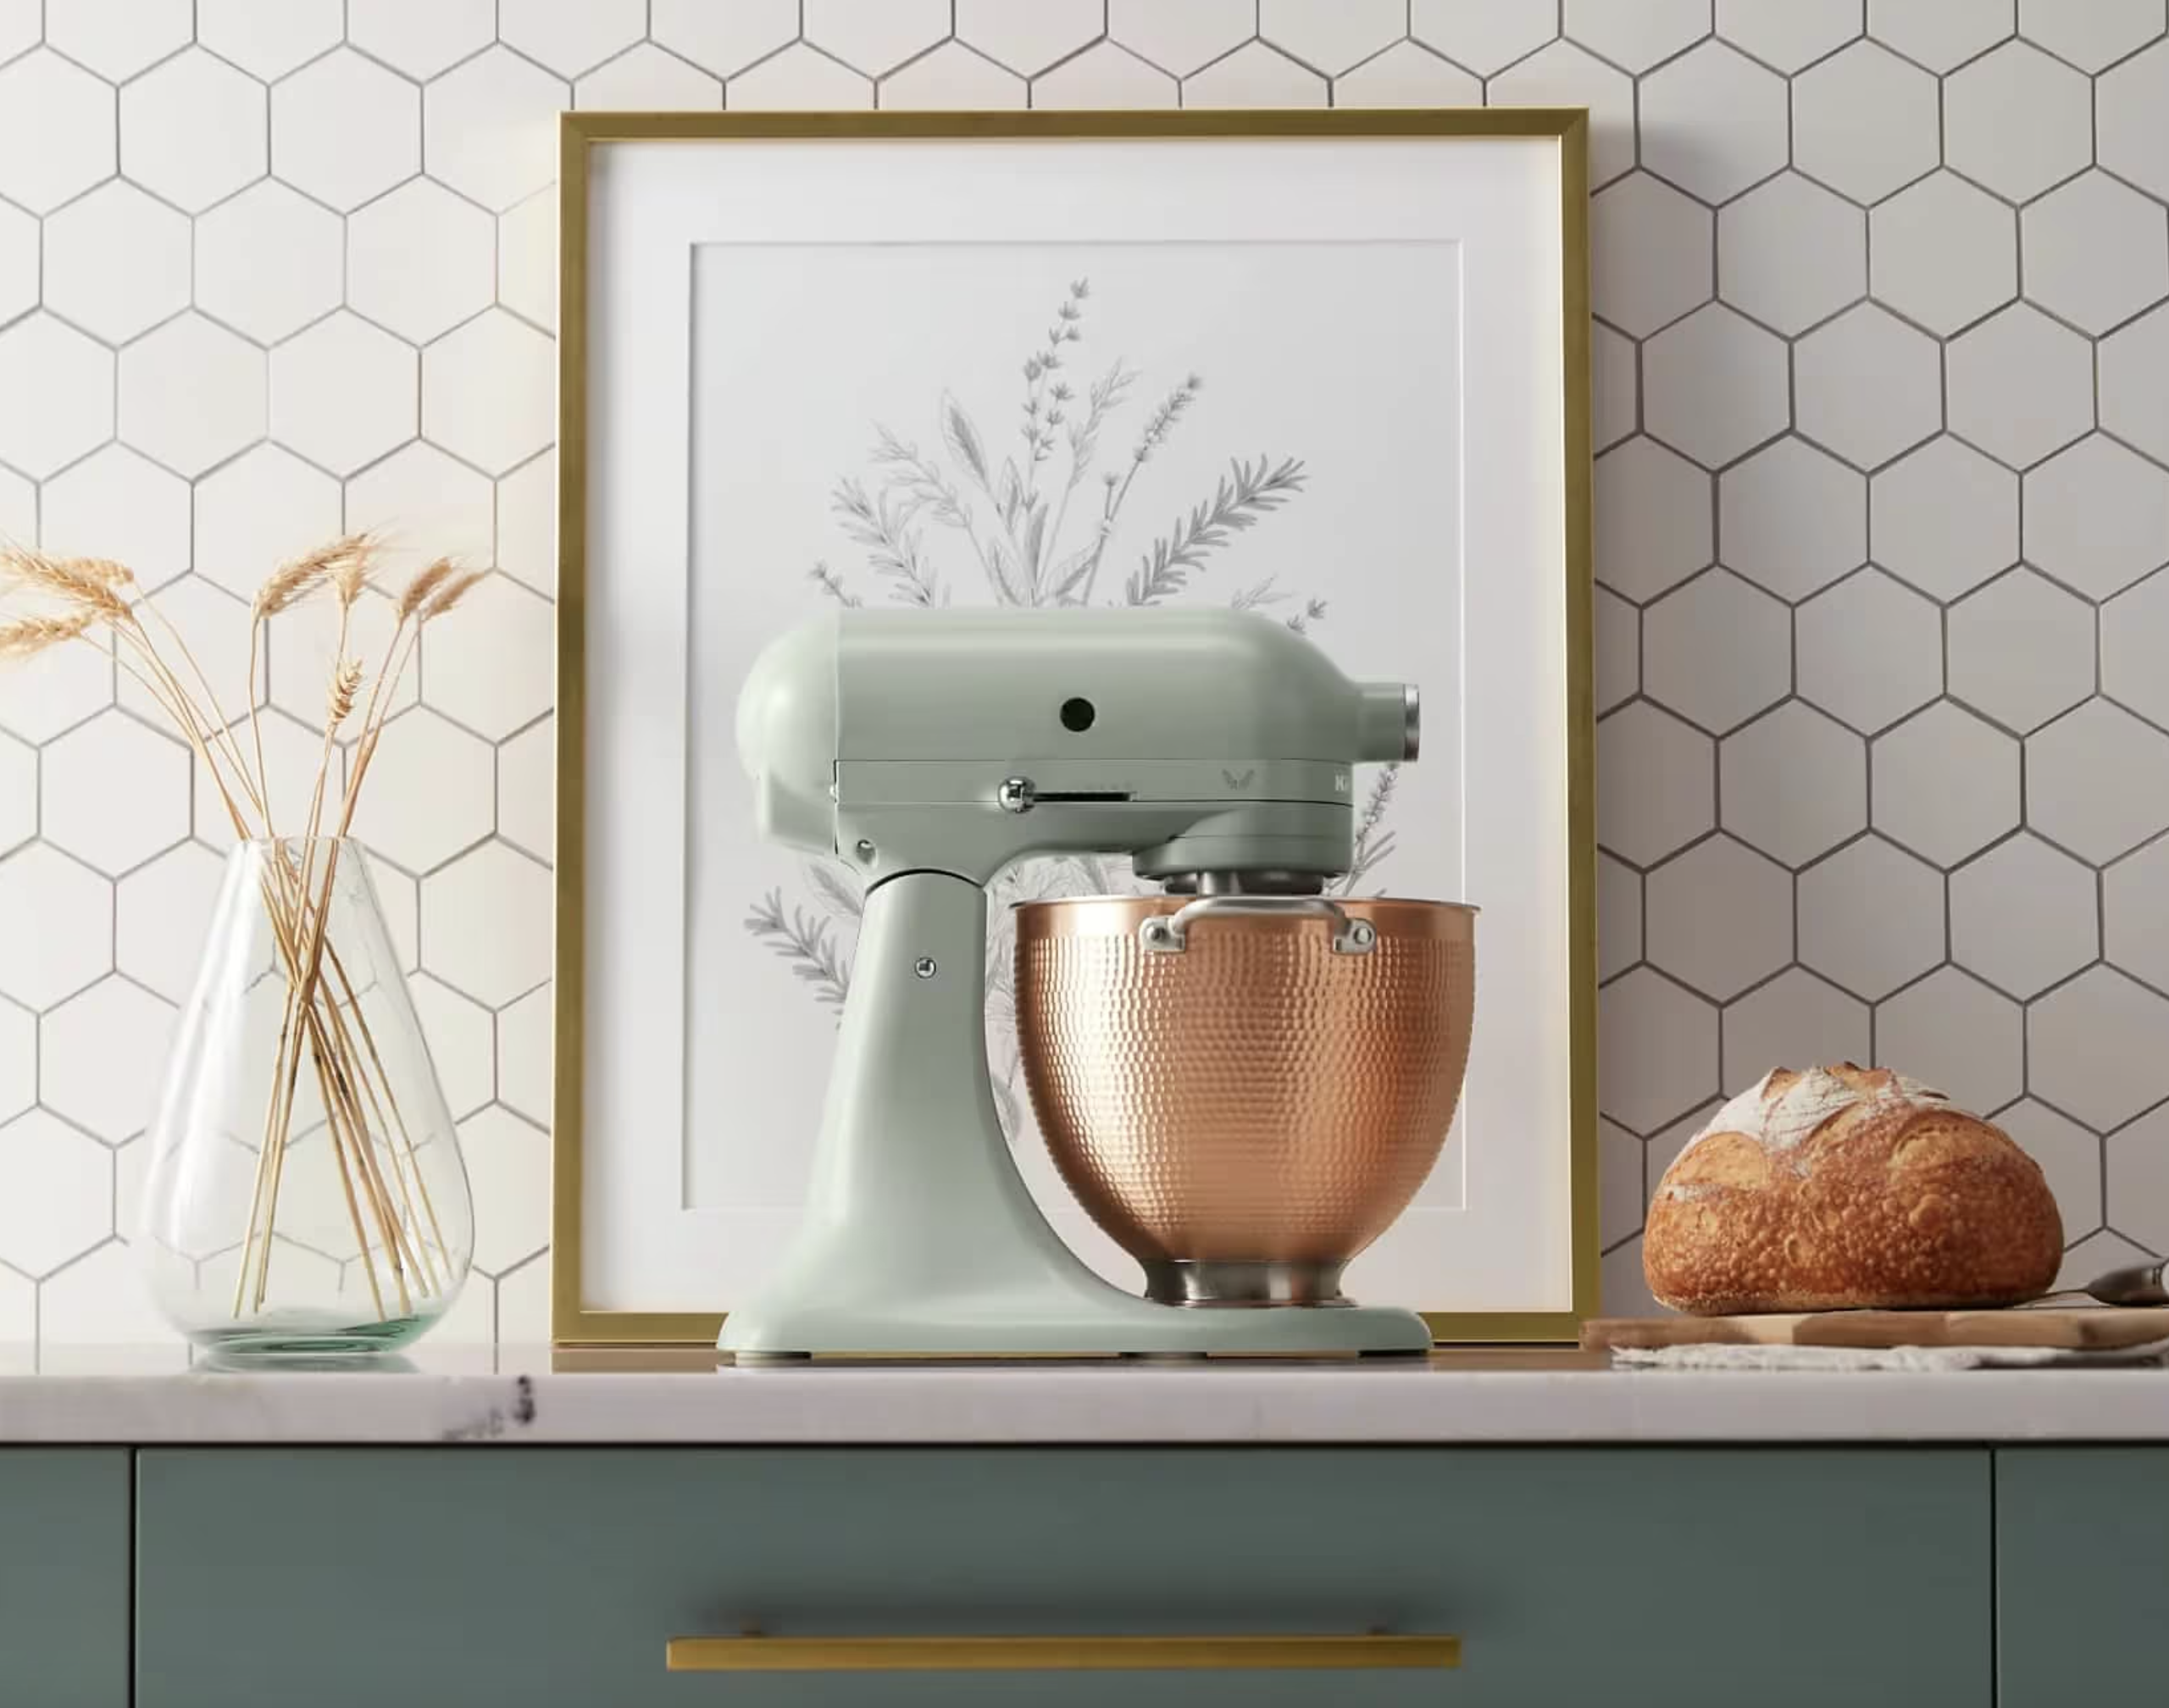 A kitchen with a mixer and bread on the counter, perfect for gifts for foodies.